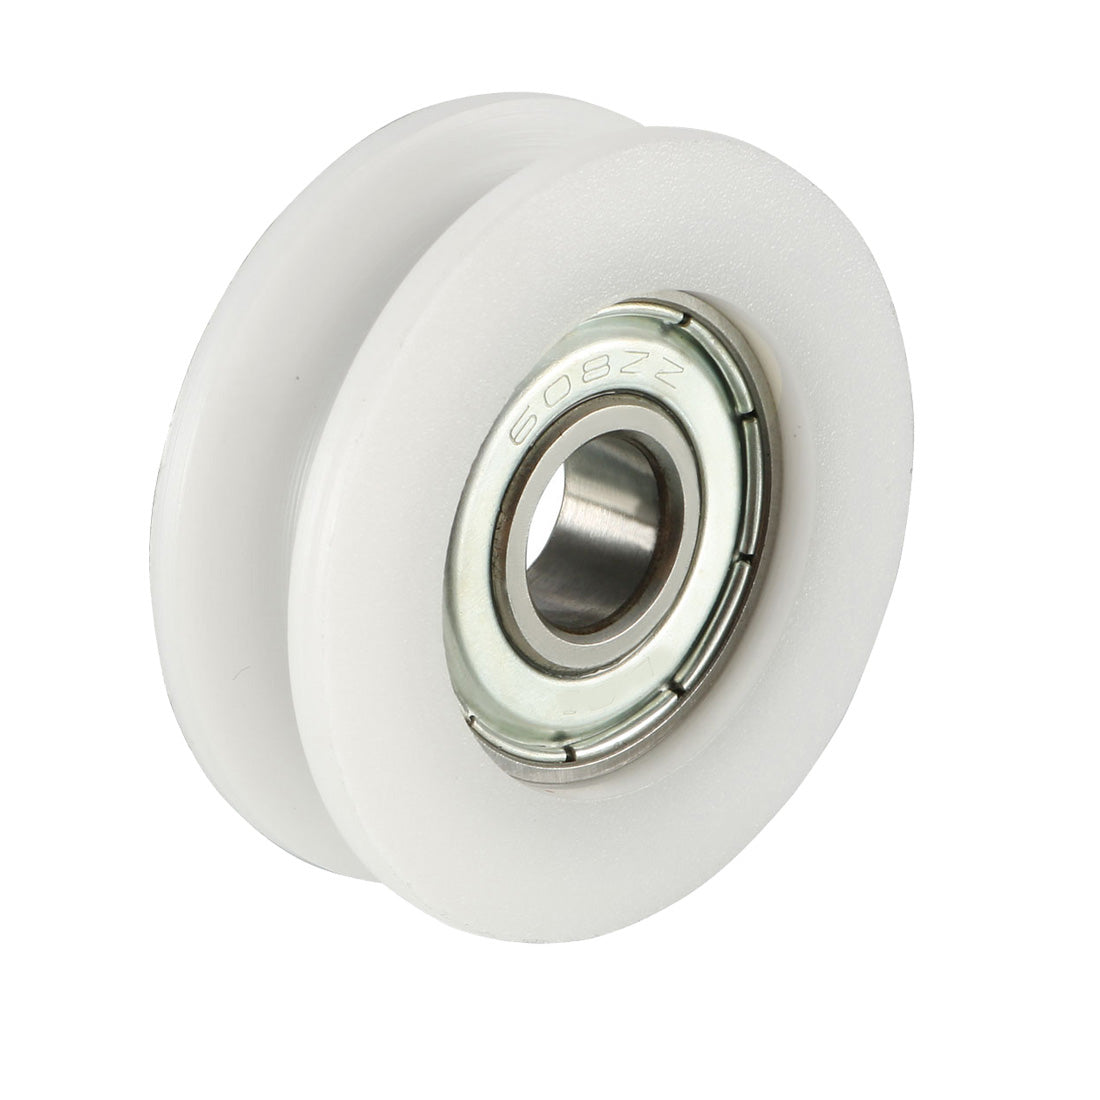 uxcell Uxcell 2.5mm Deep Metal V Groove Guide Bearing Pulley Rail Ball Wheel White 8x30x11mm 2pcs